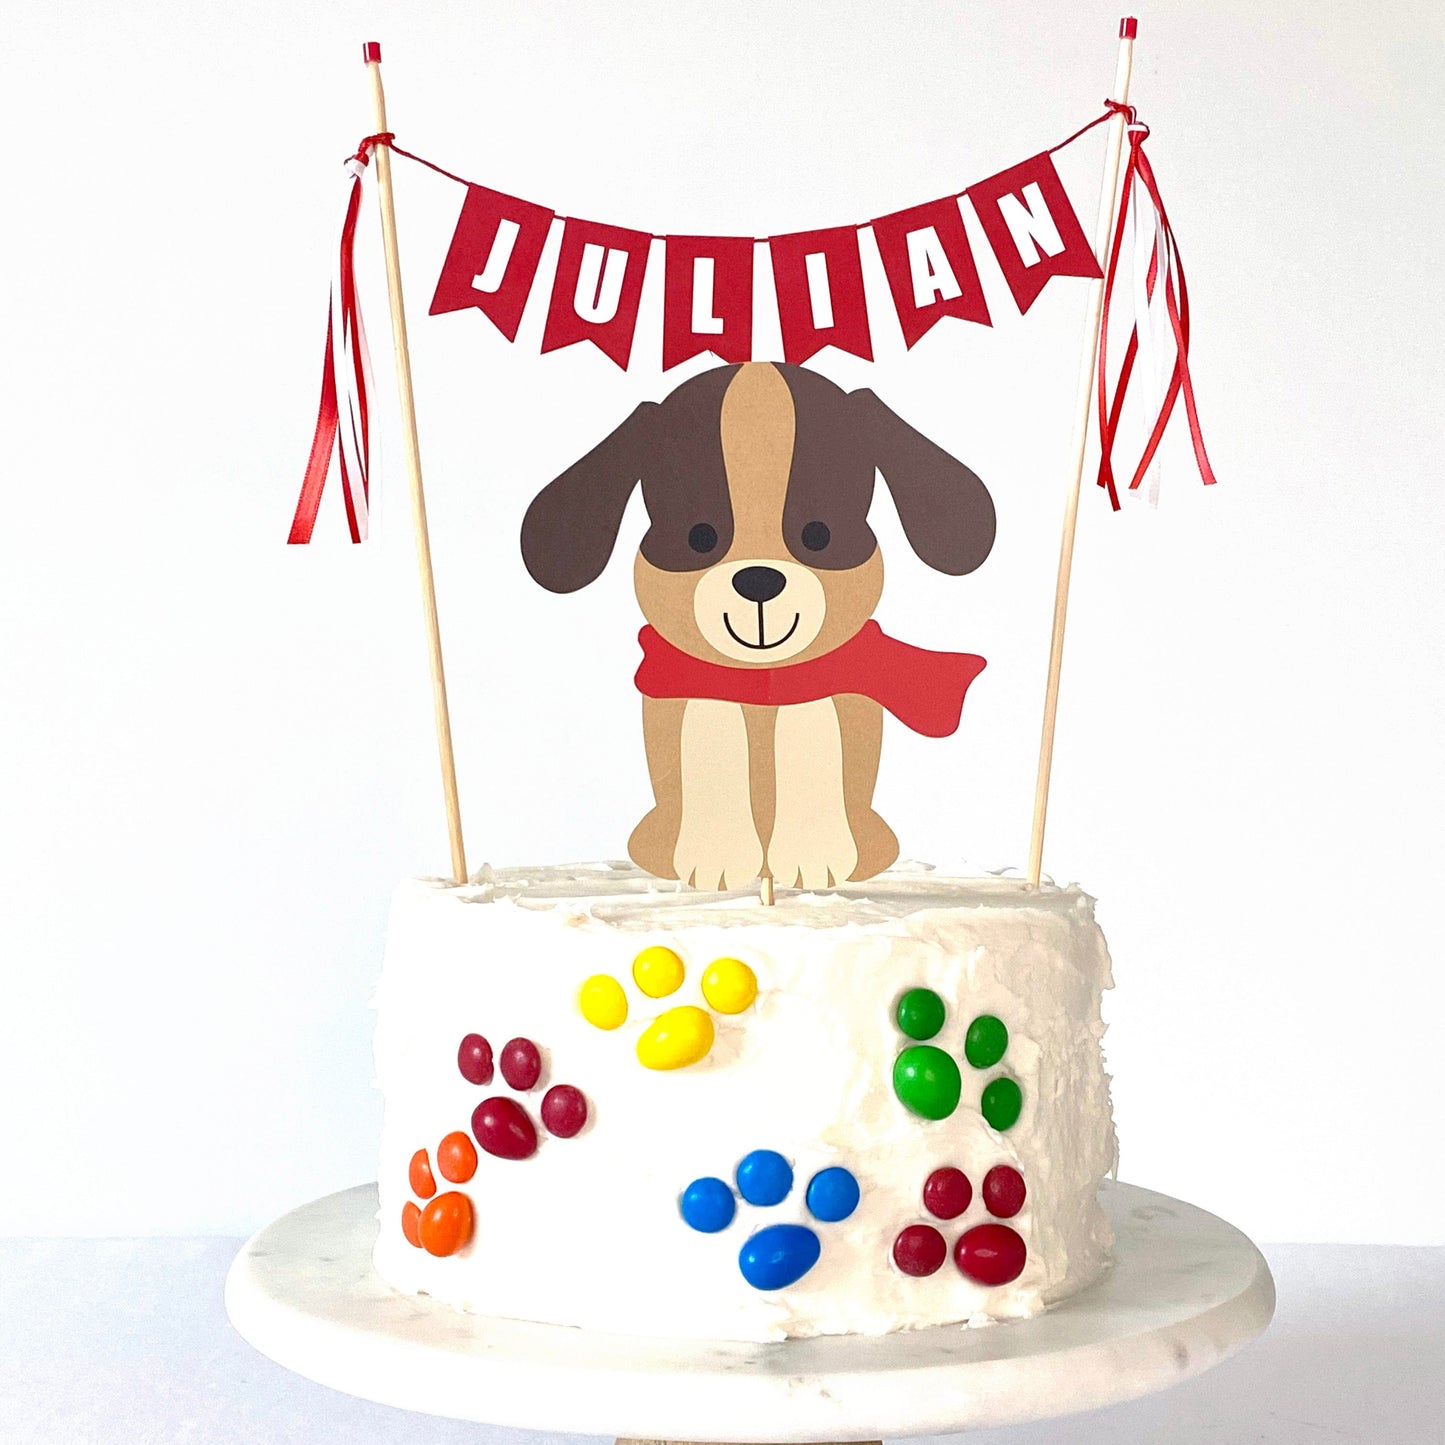 
                  
                    dog theme birthday cake topper set with brown dog wearing a red scarf and red name cake banner on a white cake decorated with M&M candies in paw print shapes
                  
                